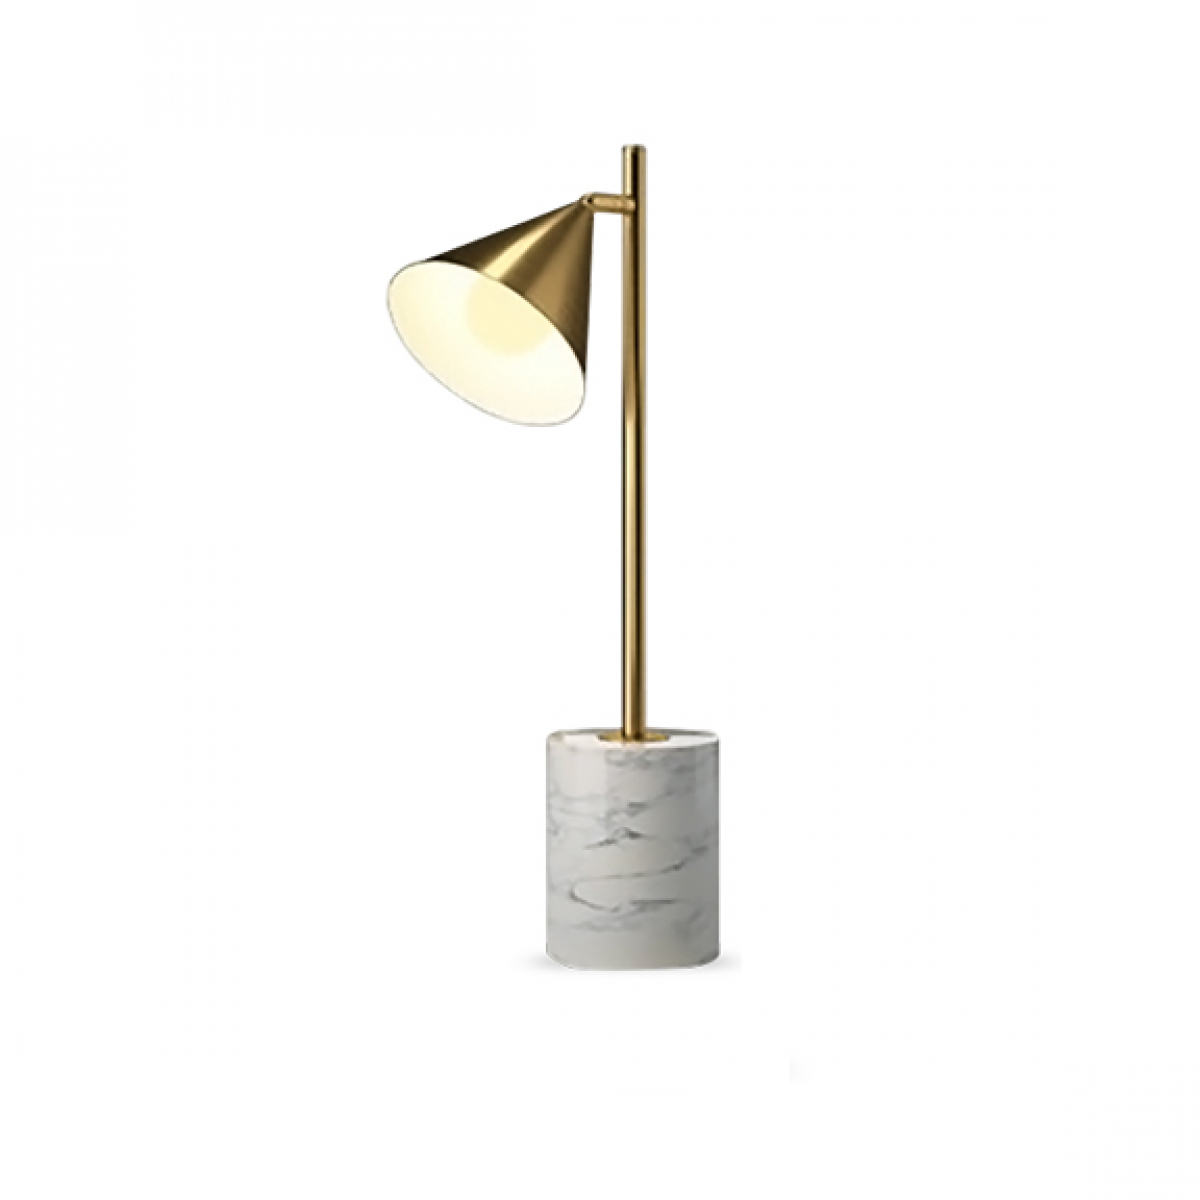 NORDIC STYLE TABLE LAMP - GOLD